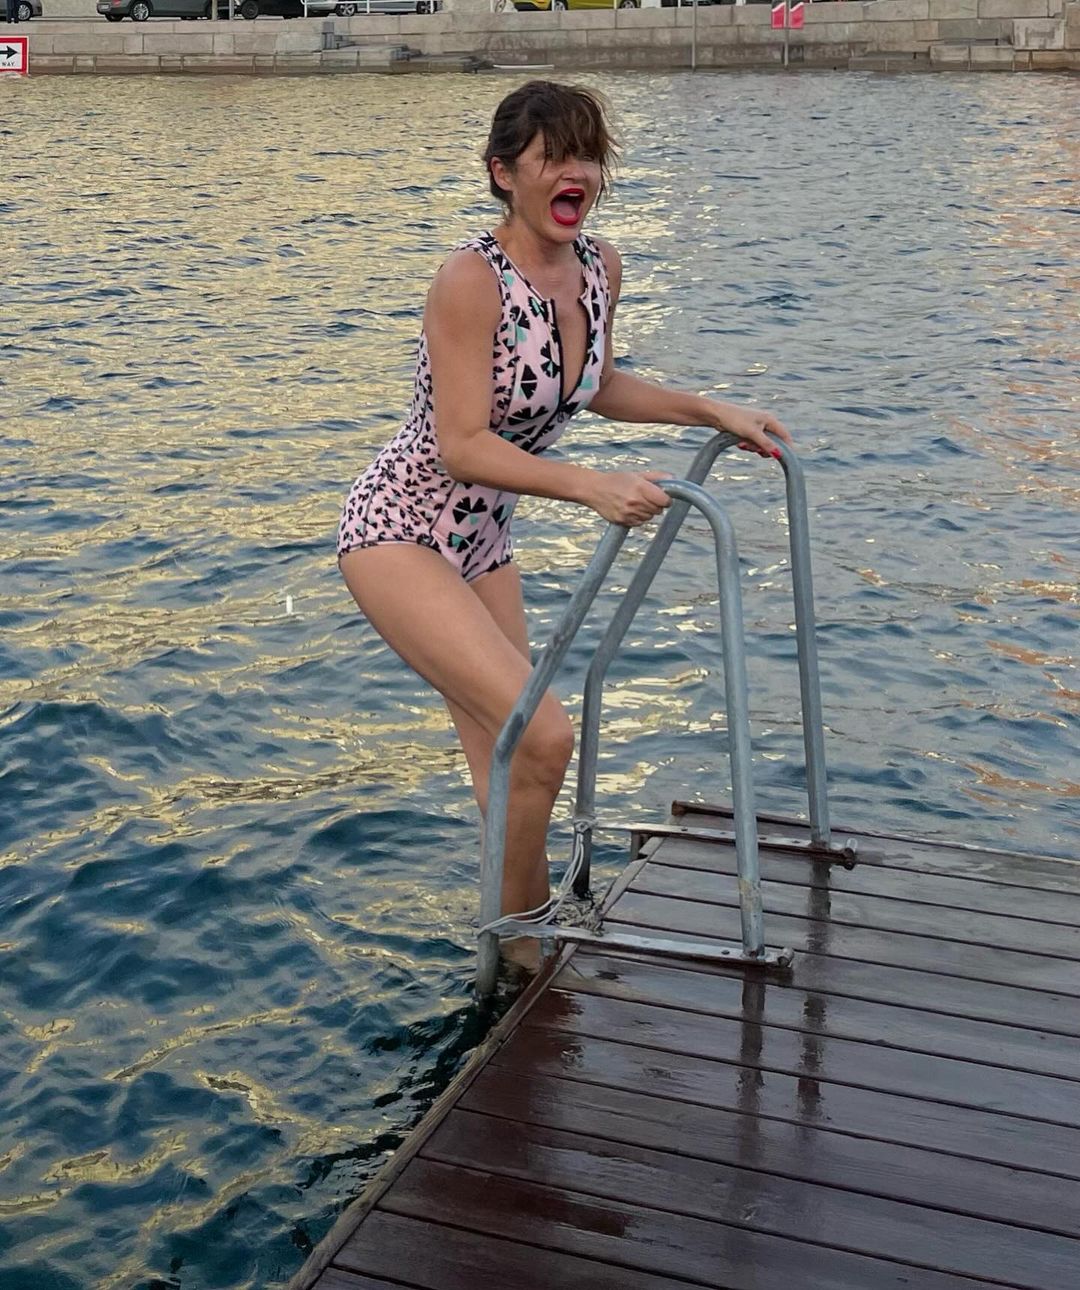 Photos n°2 : Helena Christensen Keeps Her Cold Plunge Tradition Going!